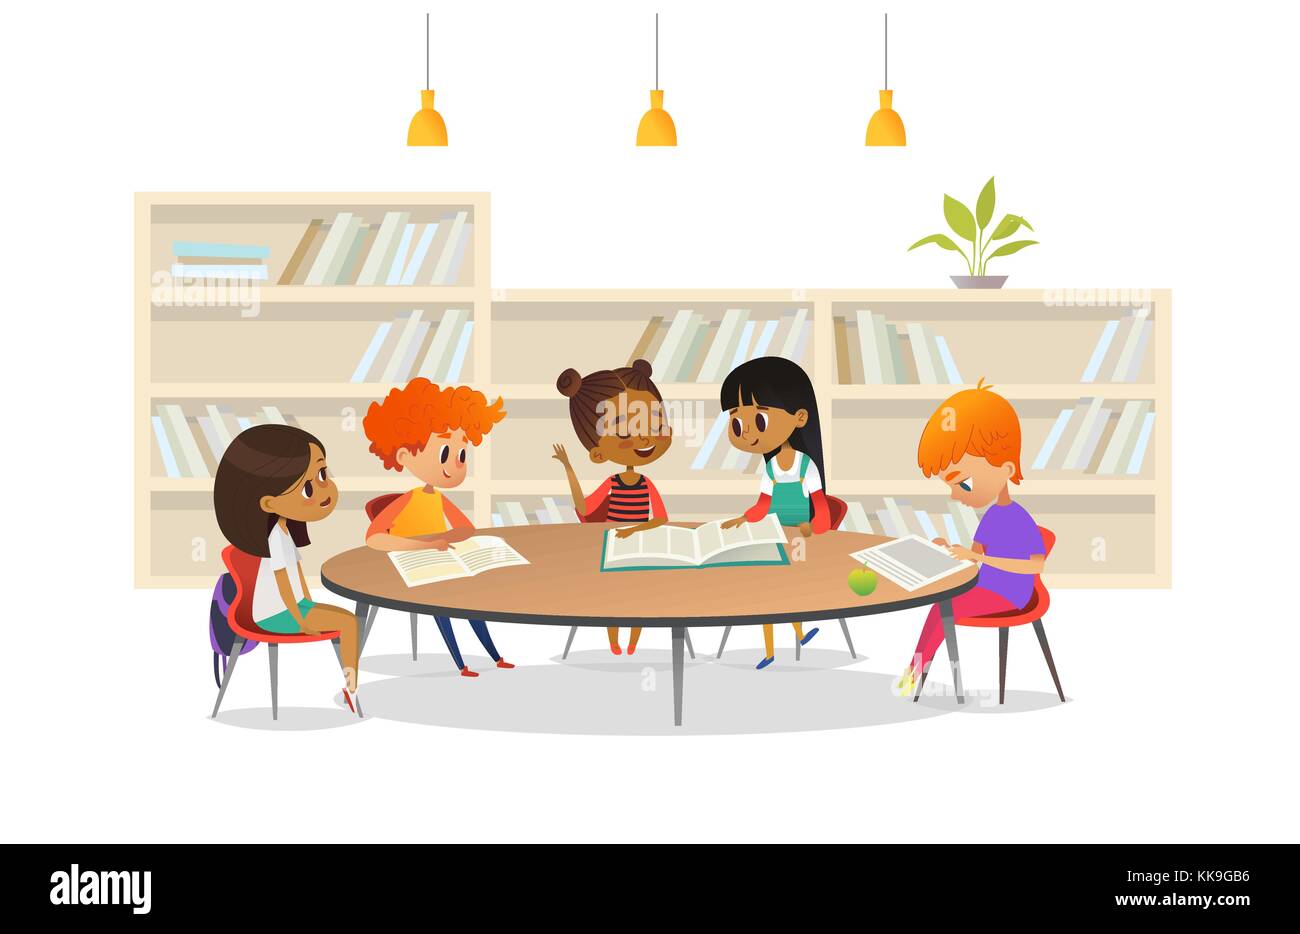 Group of children sitting around table at school library and listening to girl reading book out loud against bookcase or shelving on background. Cartoon vector illustration for banner, poster. Stock Vector